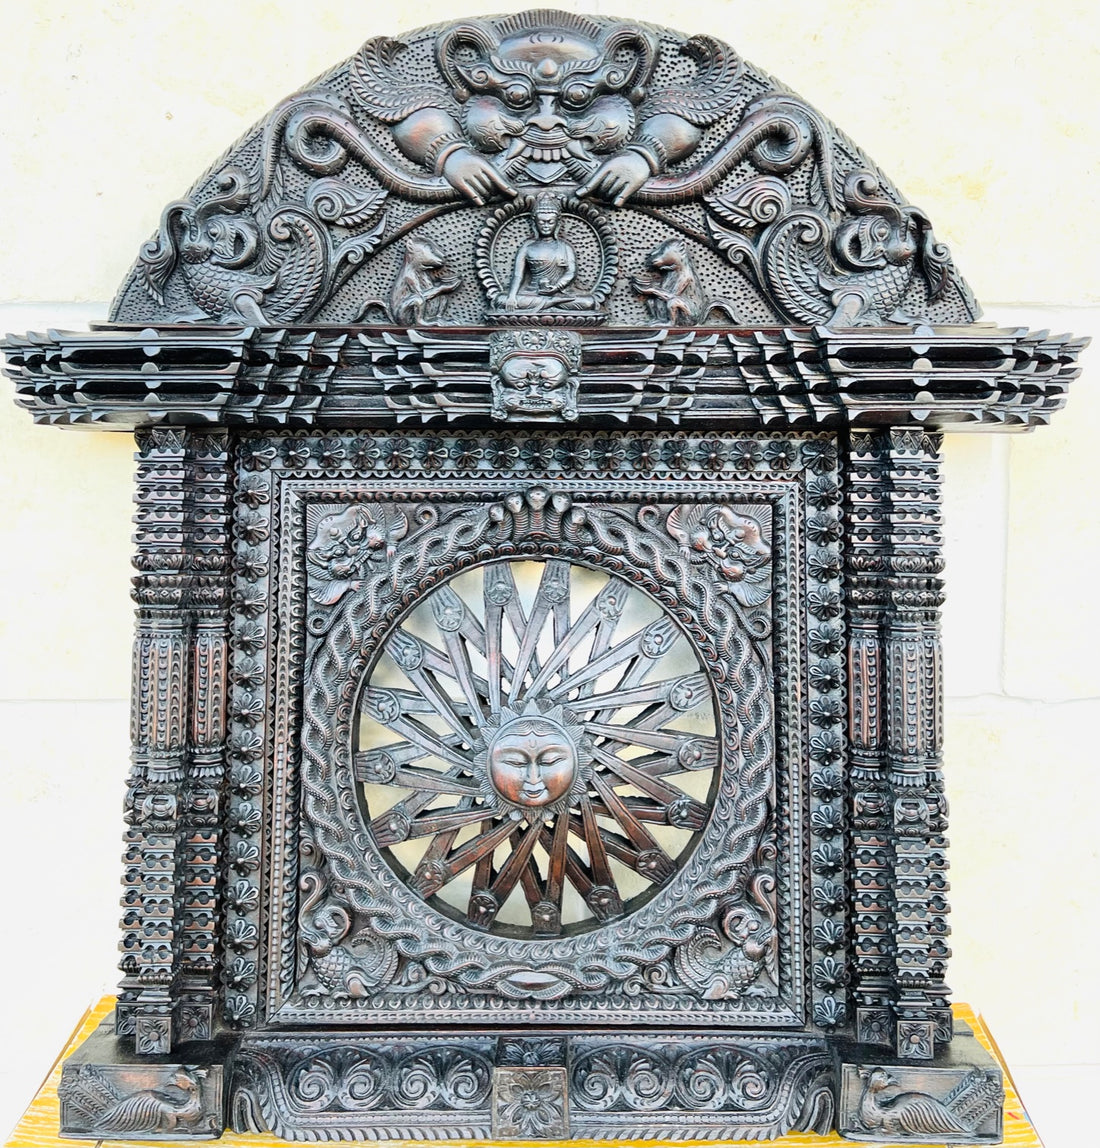 Surya Mukhi Ankhi Jhayal, a dome carved with Bhairav, and Buddha. The center of the window is carved with sun dome and a coiled snake around it.